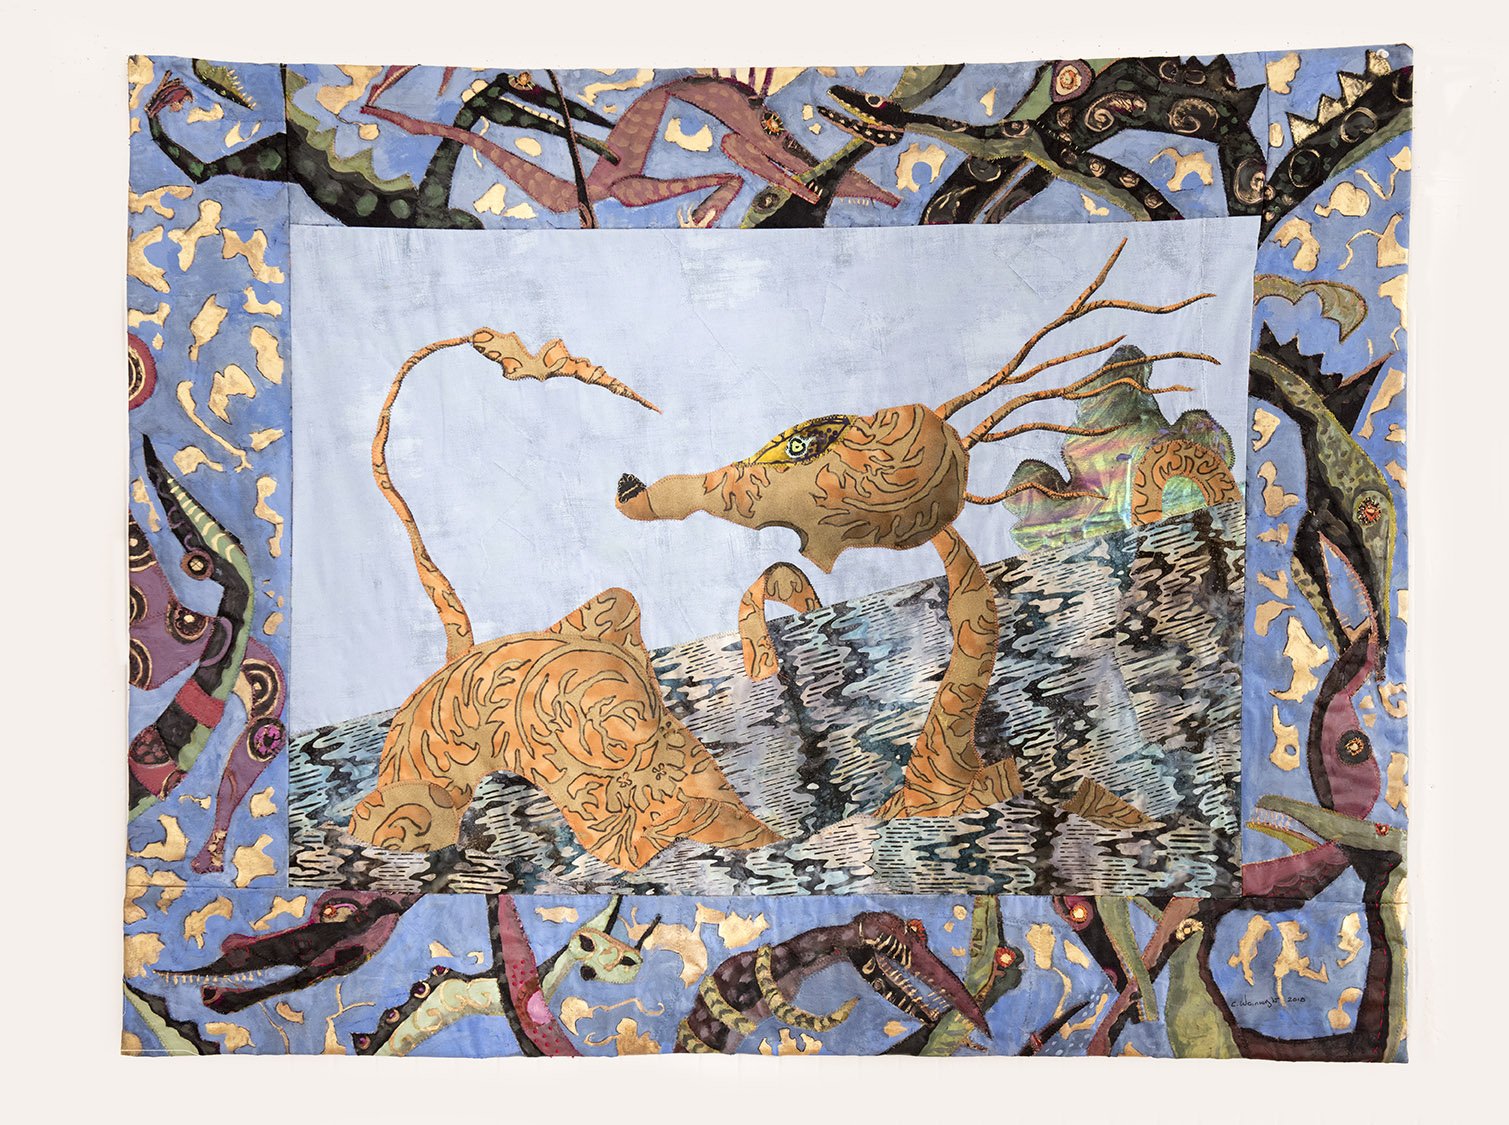 Microbio Inseguro Eliminación Gallery Kayafas on Twitter: "154 Years of Serendipity Clara Wainwright  &amp; Roger Kizik Join us for First Friday, November 2nd, 5:30-8:00pm. -  'It has come to This, 2018.' 37x47.5" Handmade quilt. ©